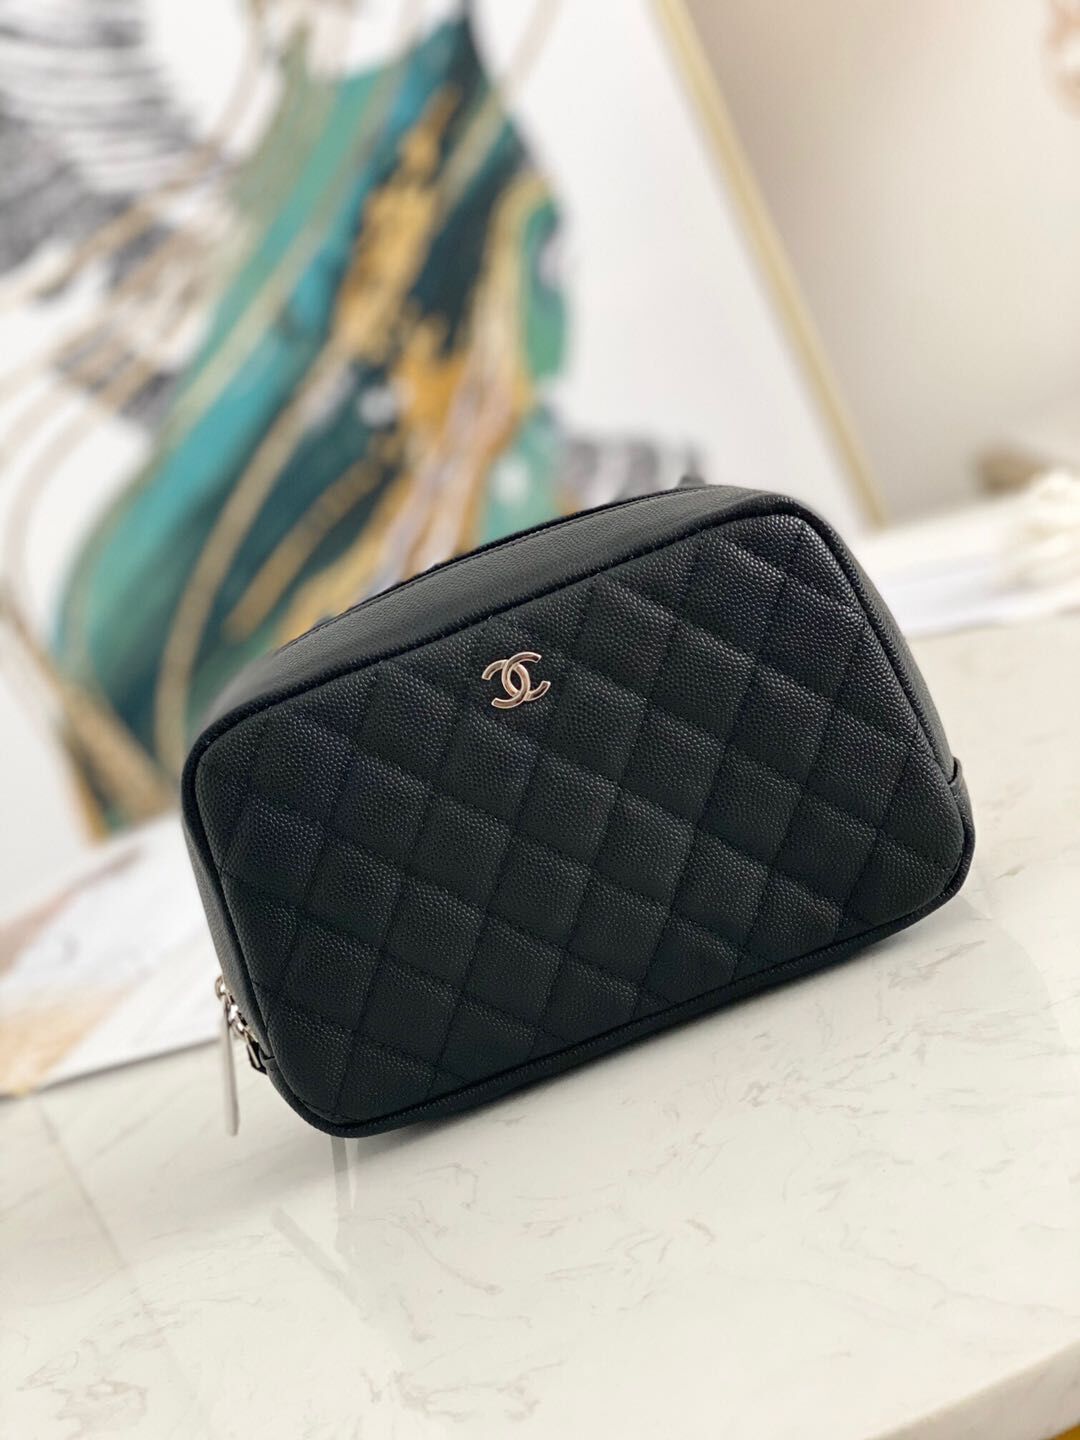 Chanel Caviar Quilted Curvy Pouch Cosmetic Case 220597 Black